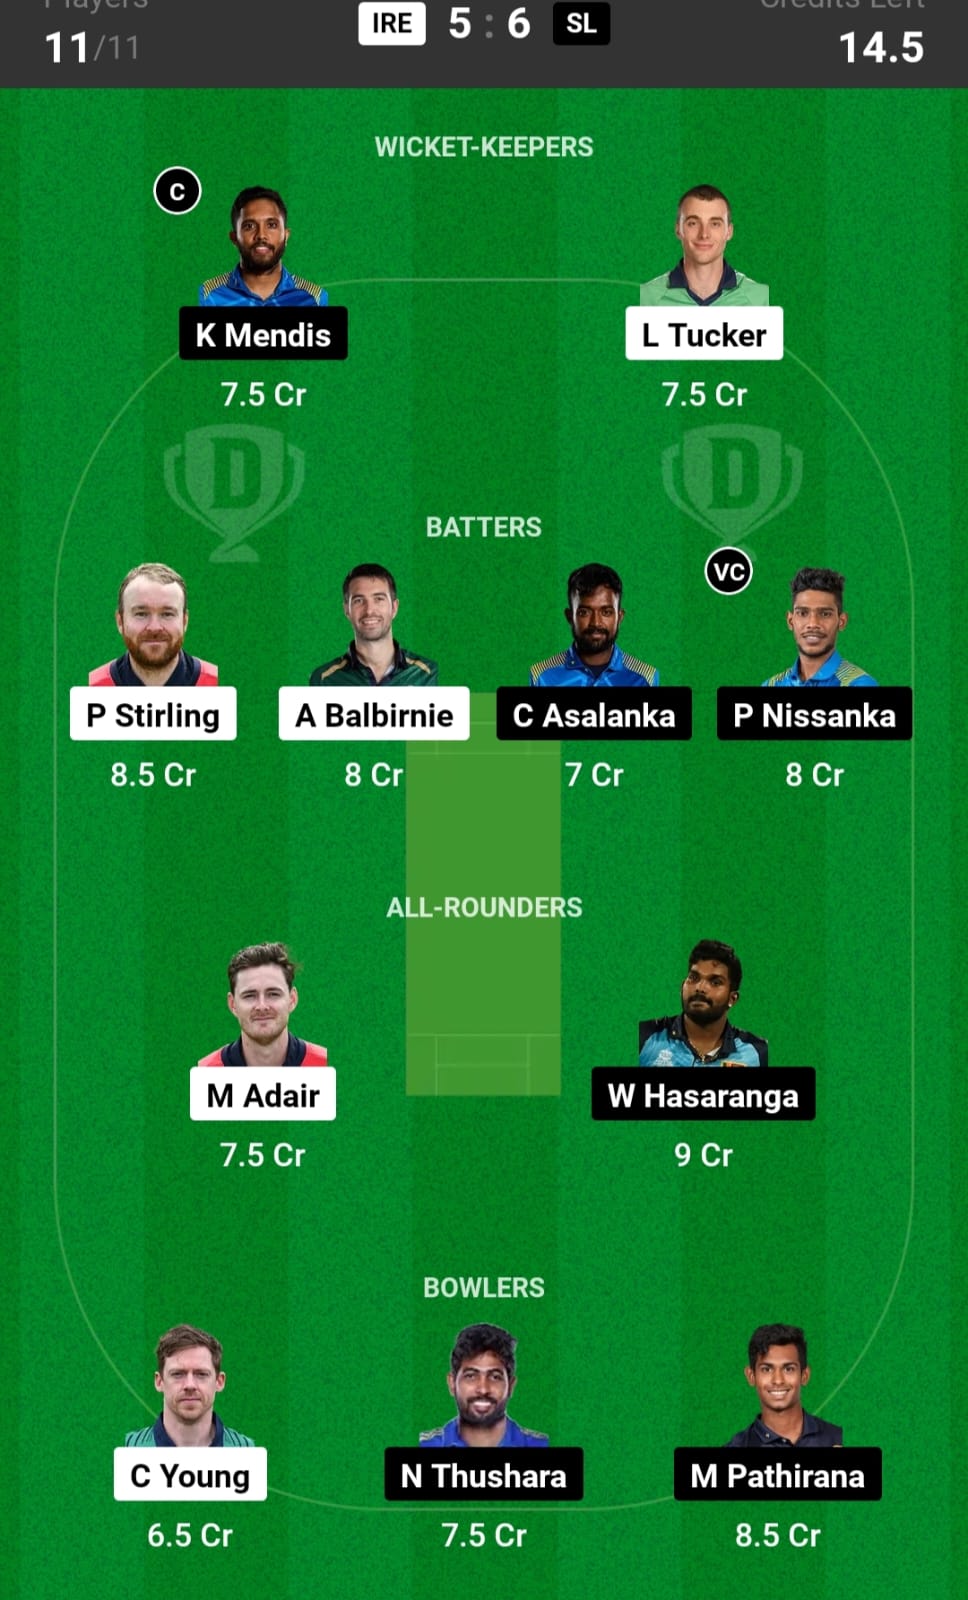 IRE vs SL Dream11 Team Prediction - Kusal Mendis & Pathum Nissanka will be the excellent option for C & VC